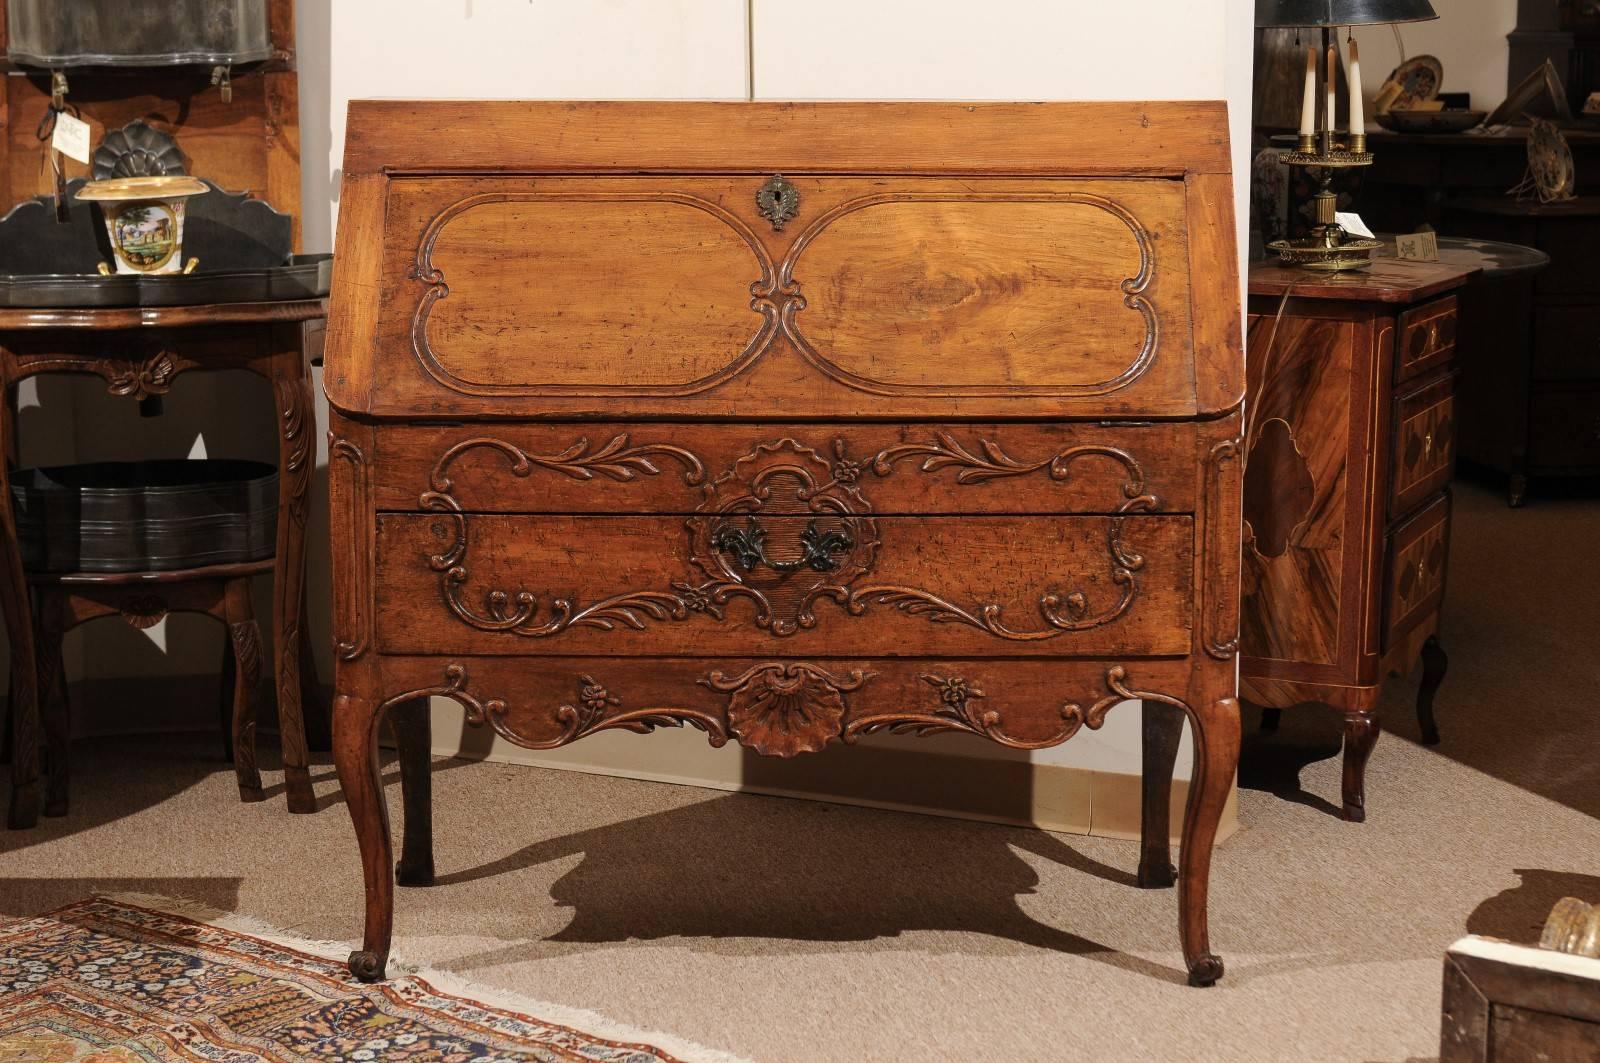 A French Regence fruitwood bureau slant front desk with fitted interior, shaped apron with shell carving ending cabriole legs.